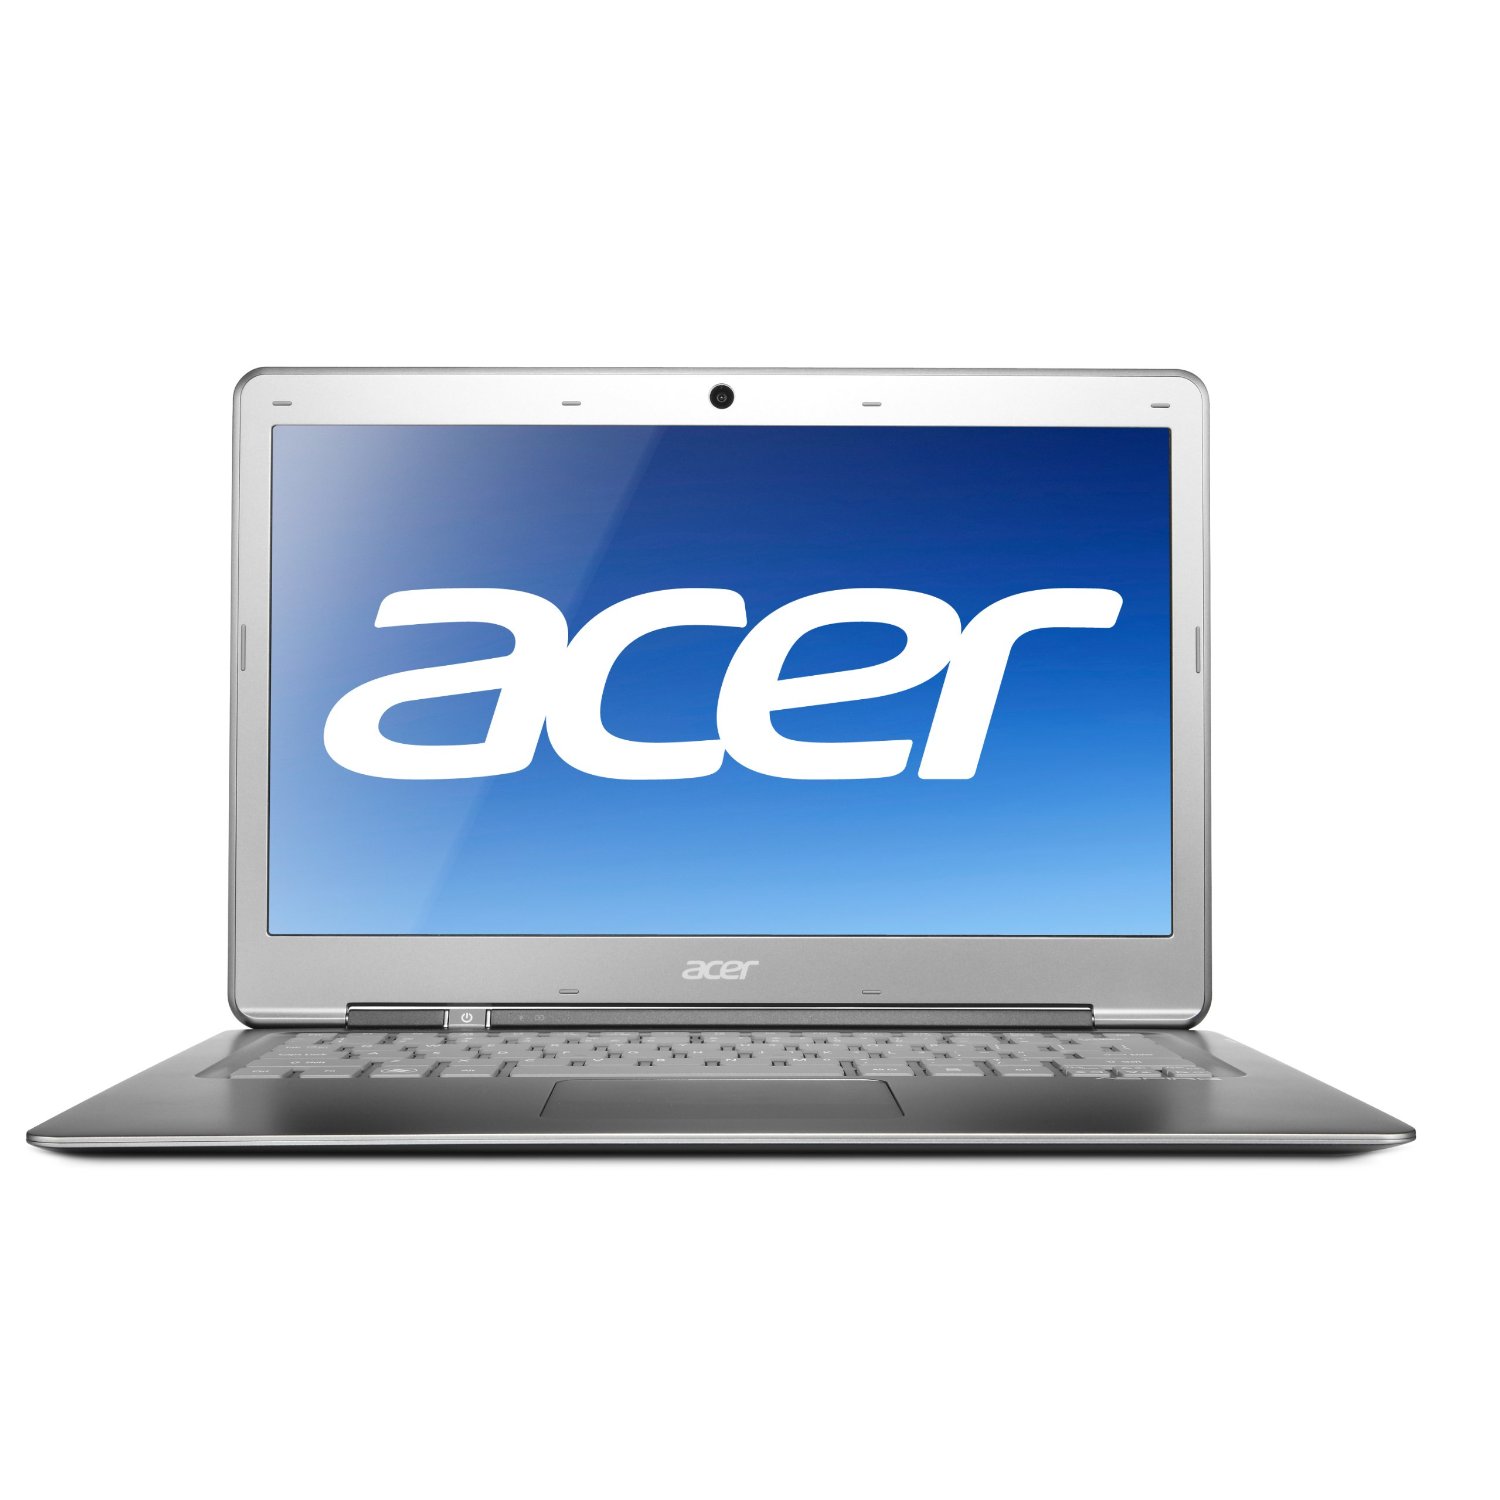 http://thetechjournal.com/wp-content/uploads/images/1204/1335733207-acers-new-aspire-s3-133inch-hd-display-ultrabook-5.jpg